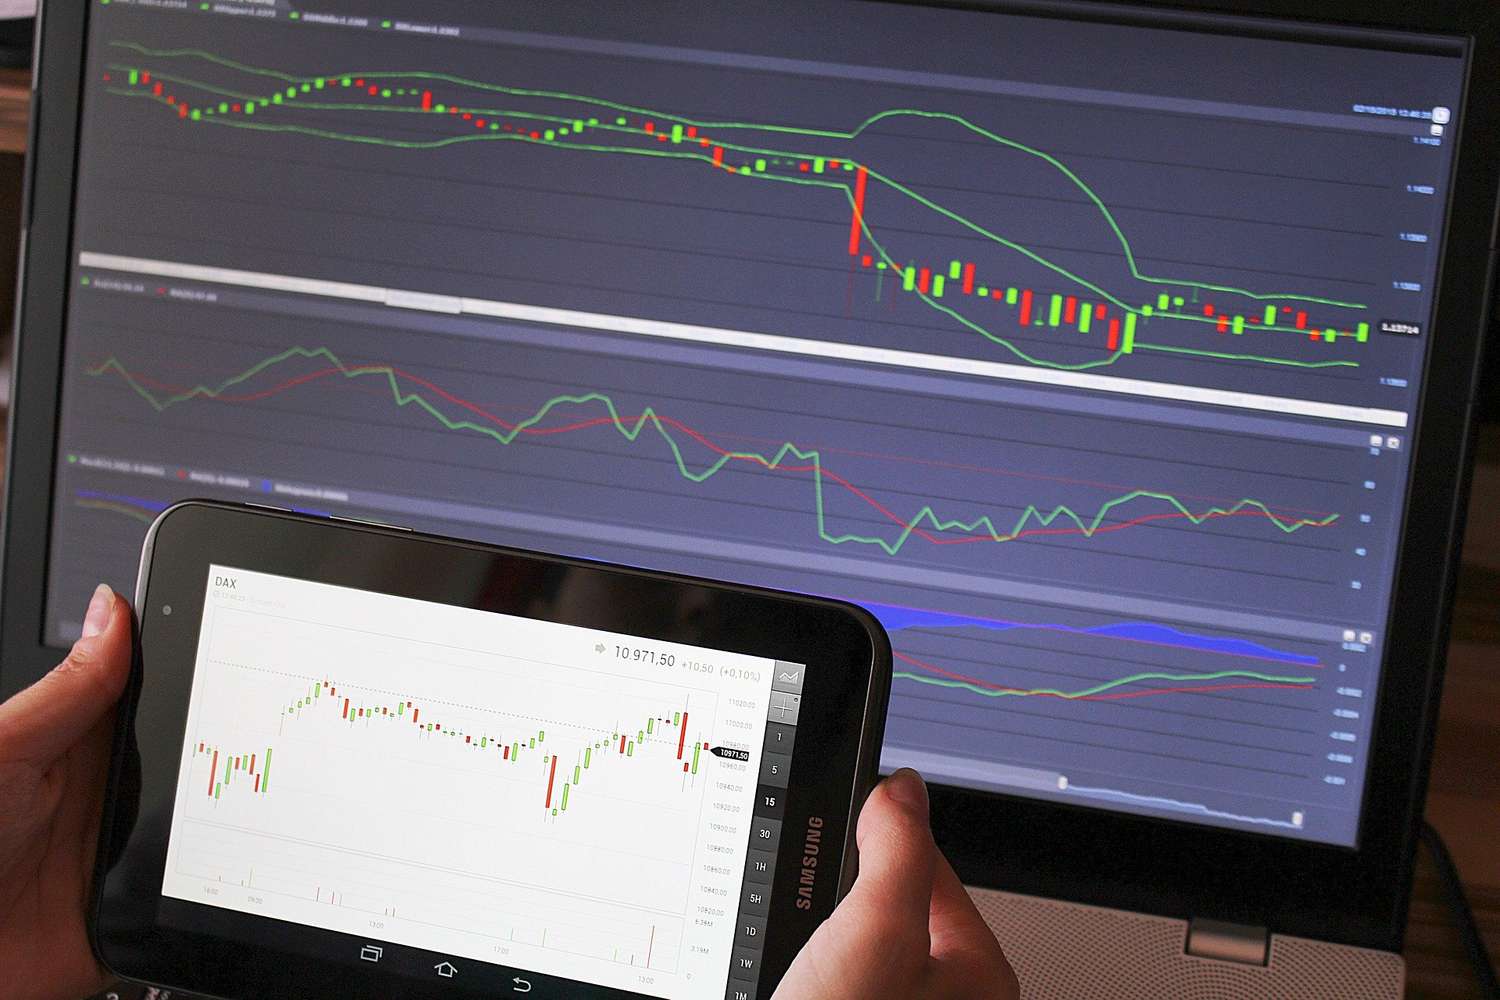 Closeup forex charts on computer with iPad showing candles